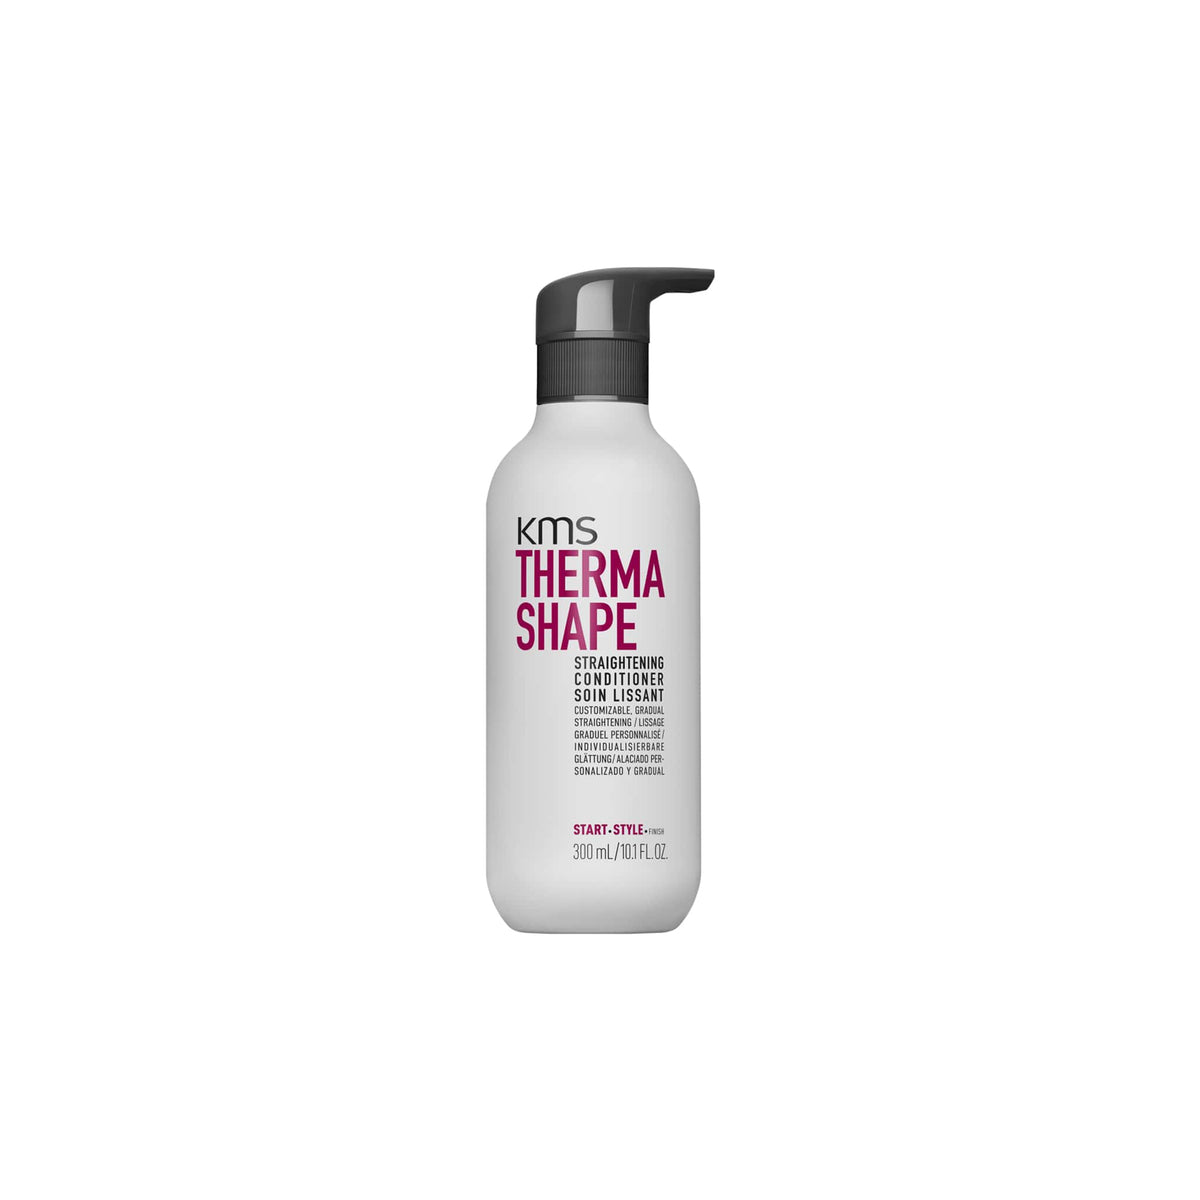 Kms California Therma Shape Straightening Conditioner 300ml